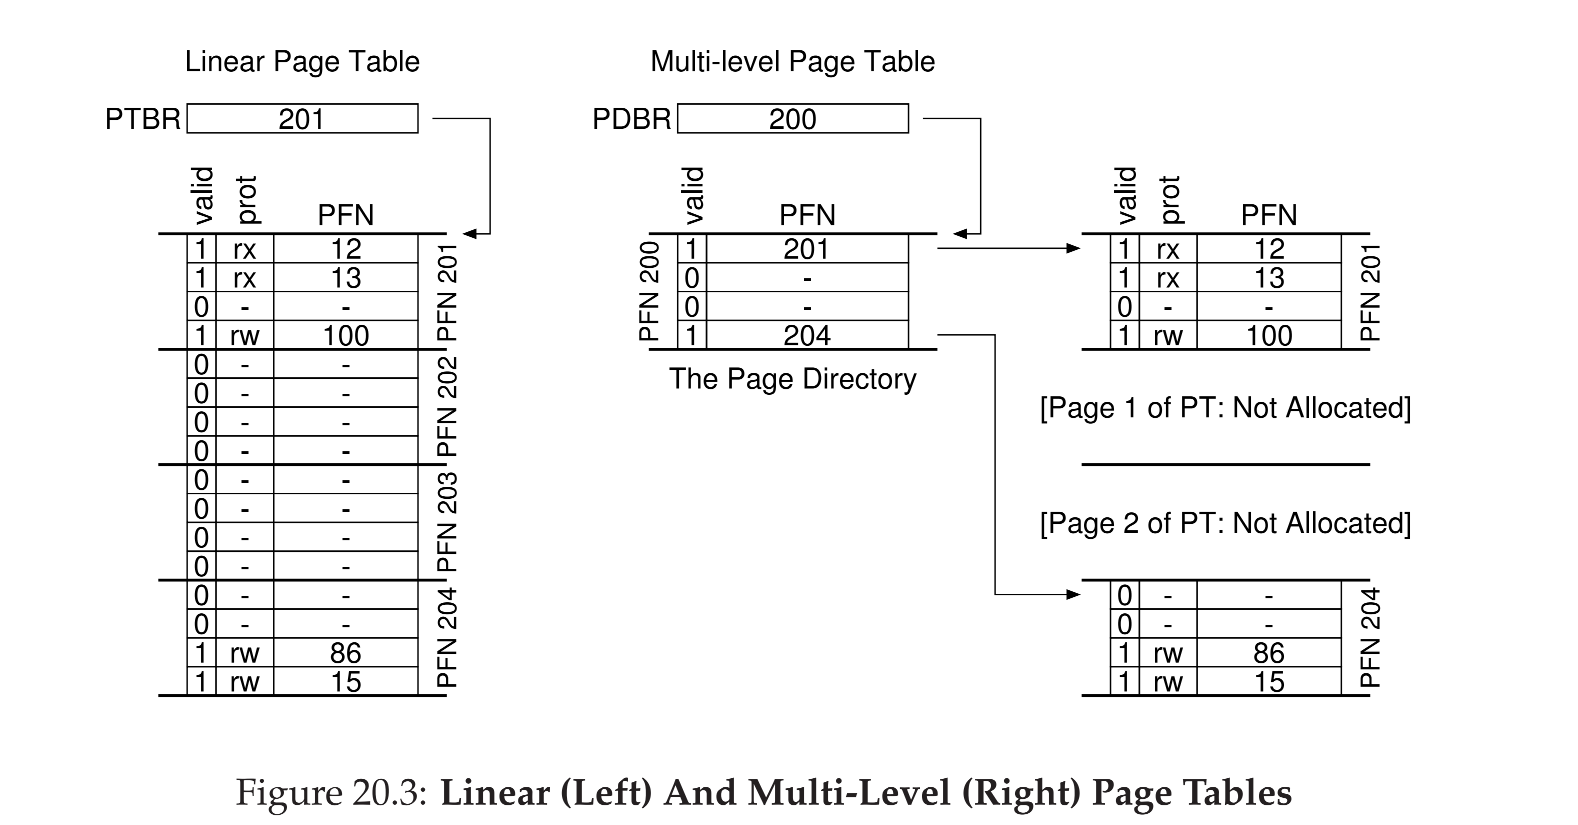 Multi-level Page Tables